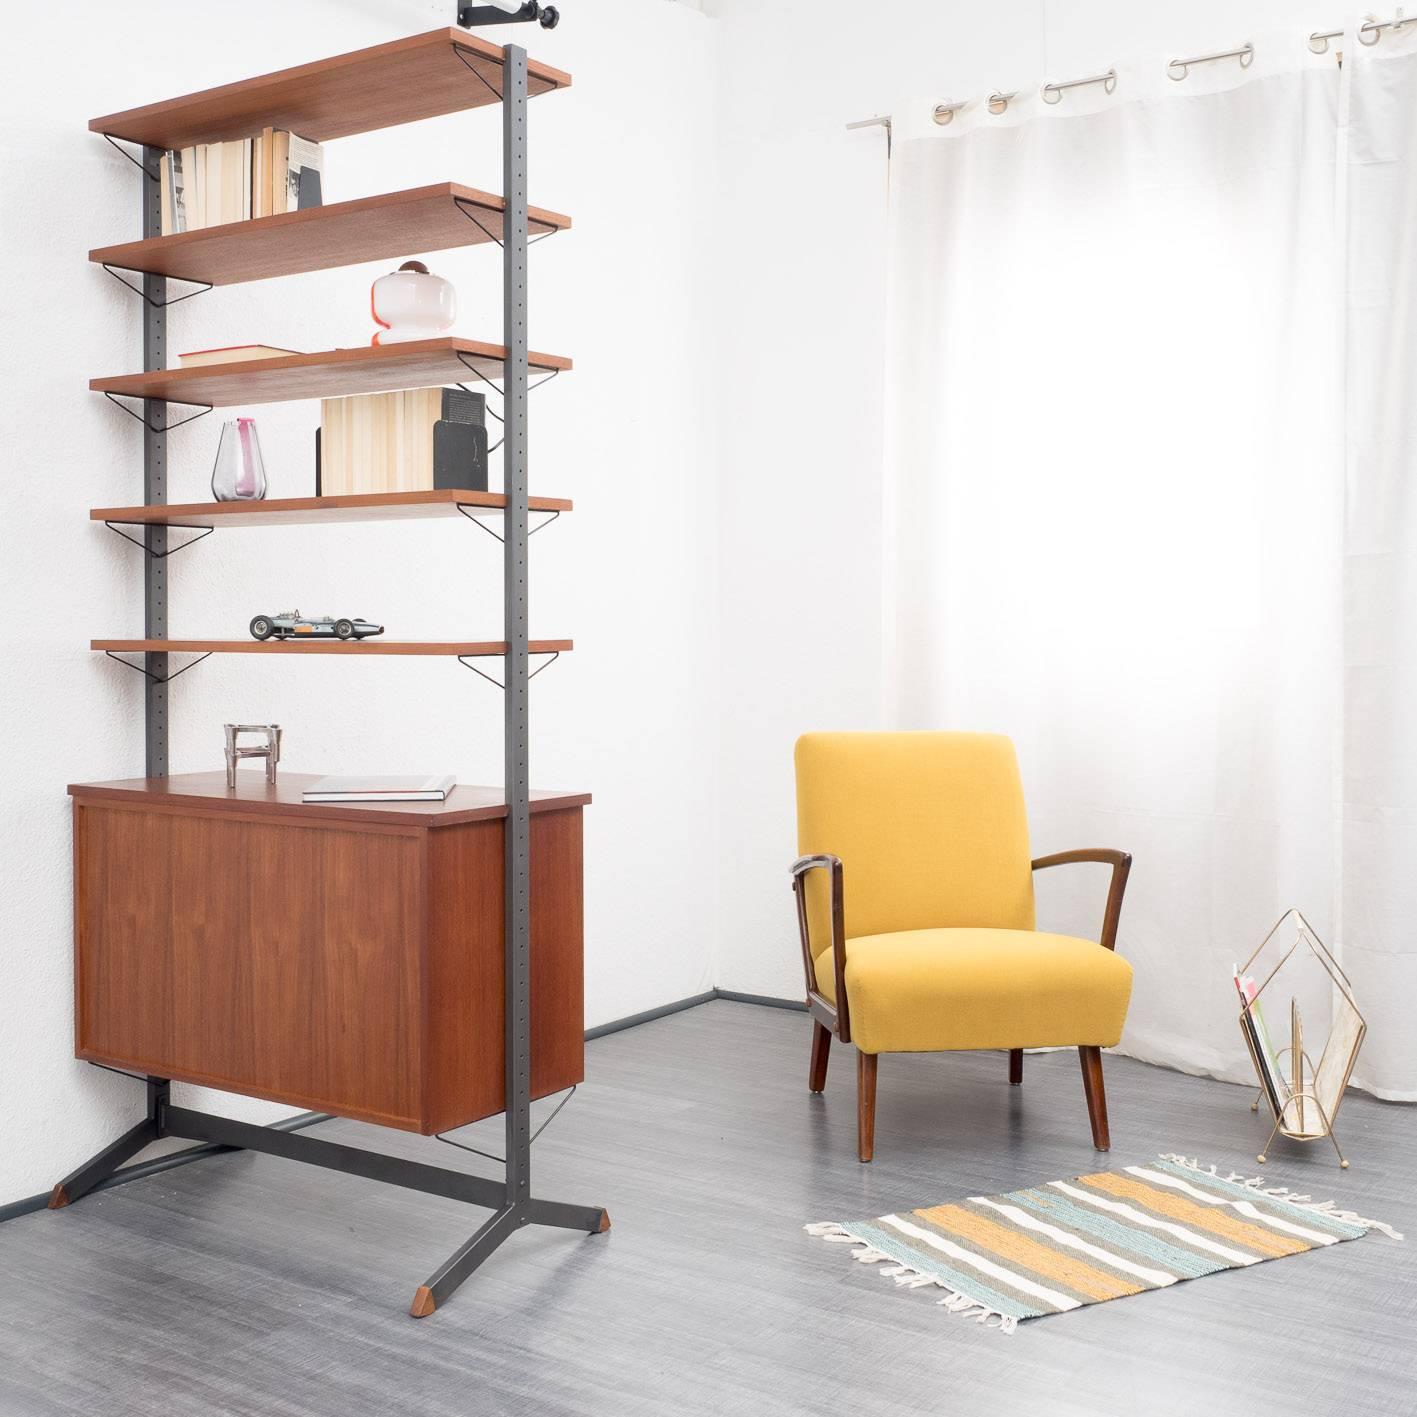 Rare shelf by the Swedish manufacturer Pira, version "Pira".

Modular system with two anthracite-colored metal ladders, five shelves and one container with sliding doors, teak. The shelf is free-standing and can be used as a